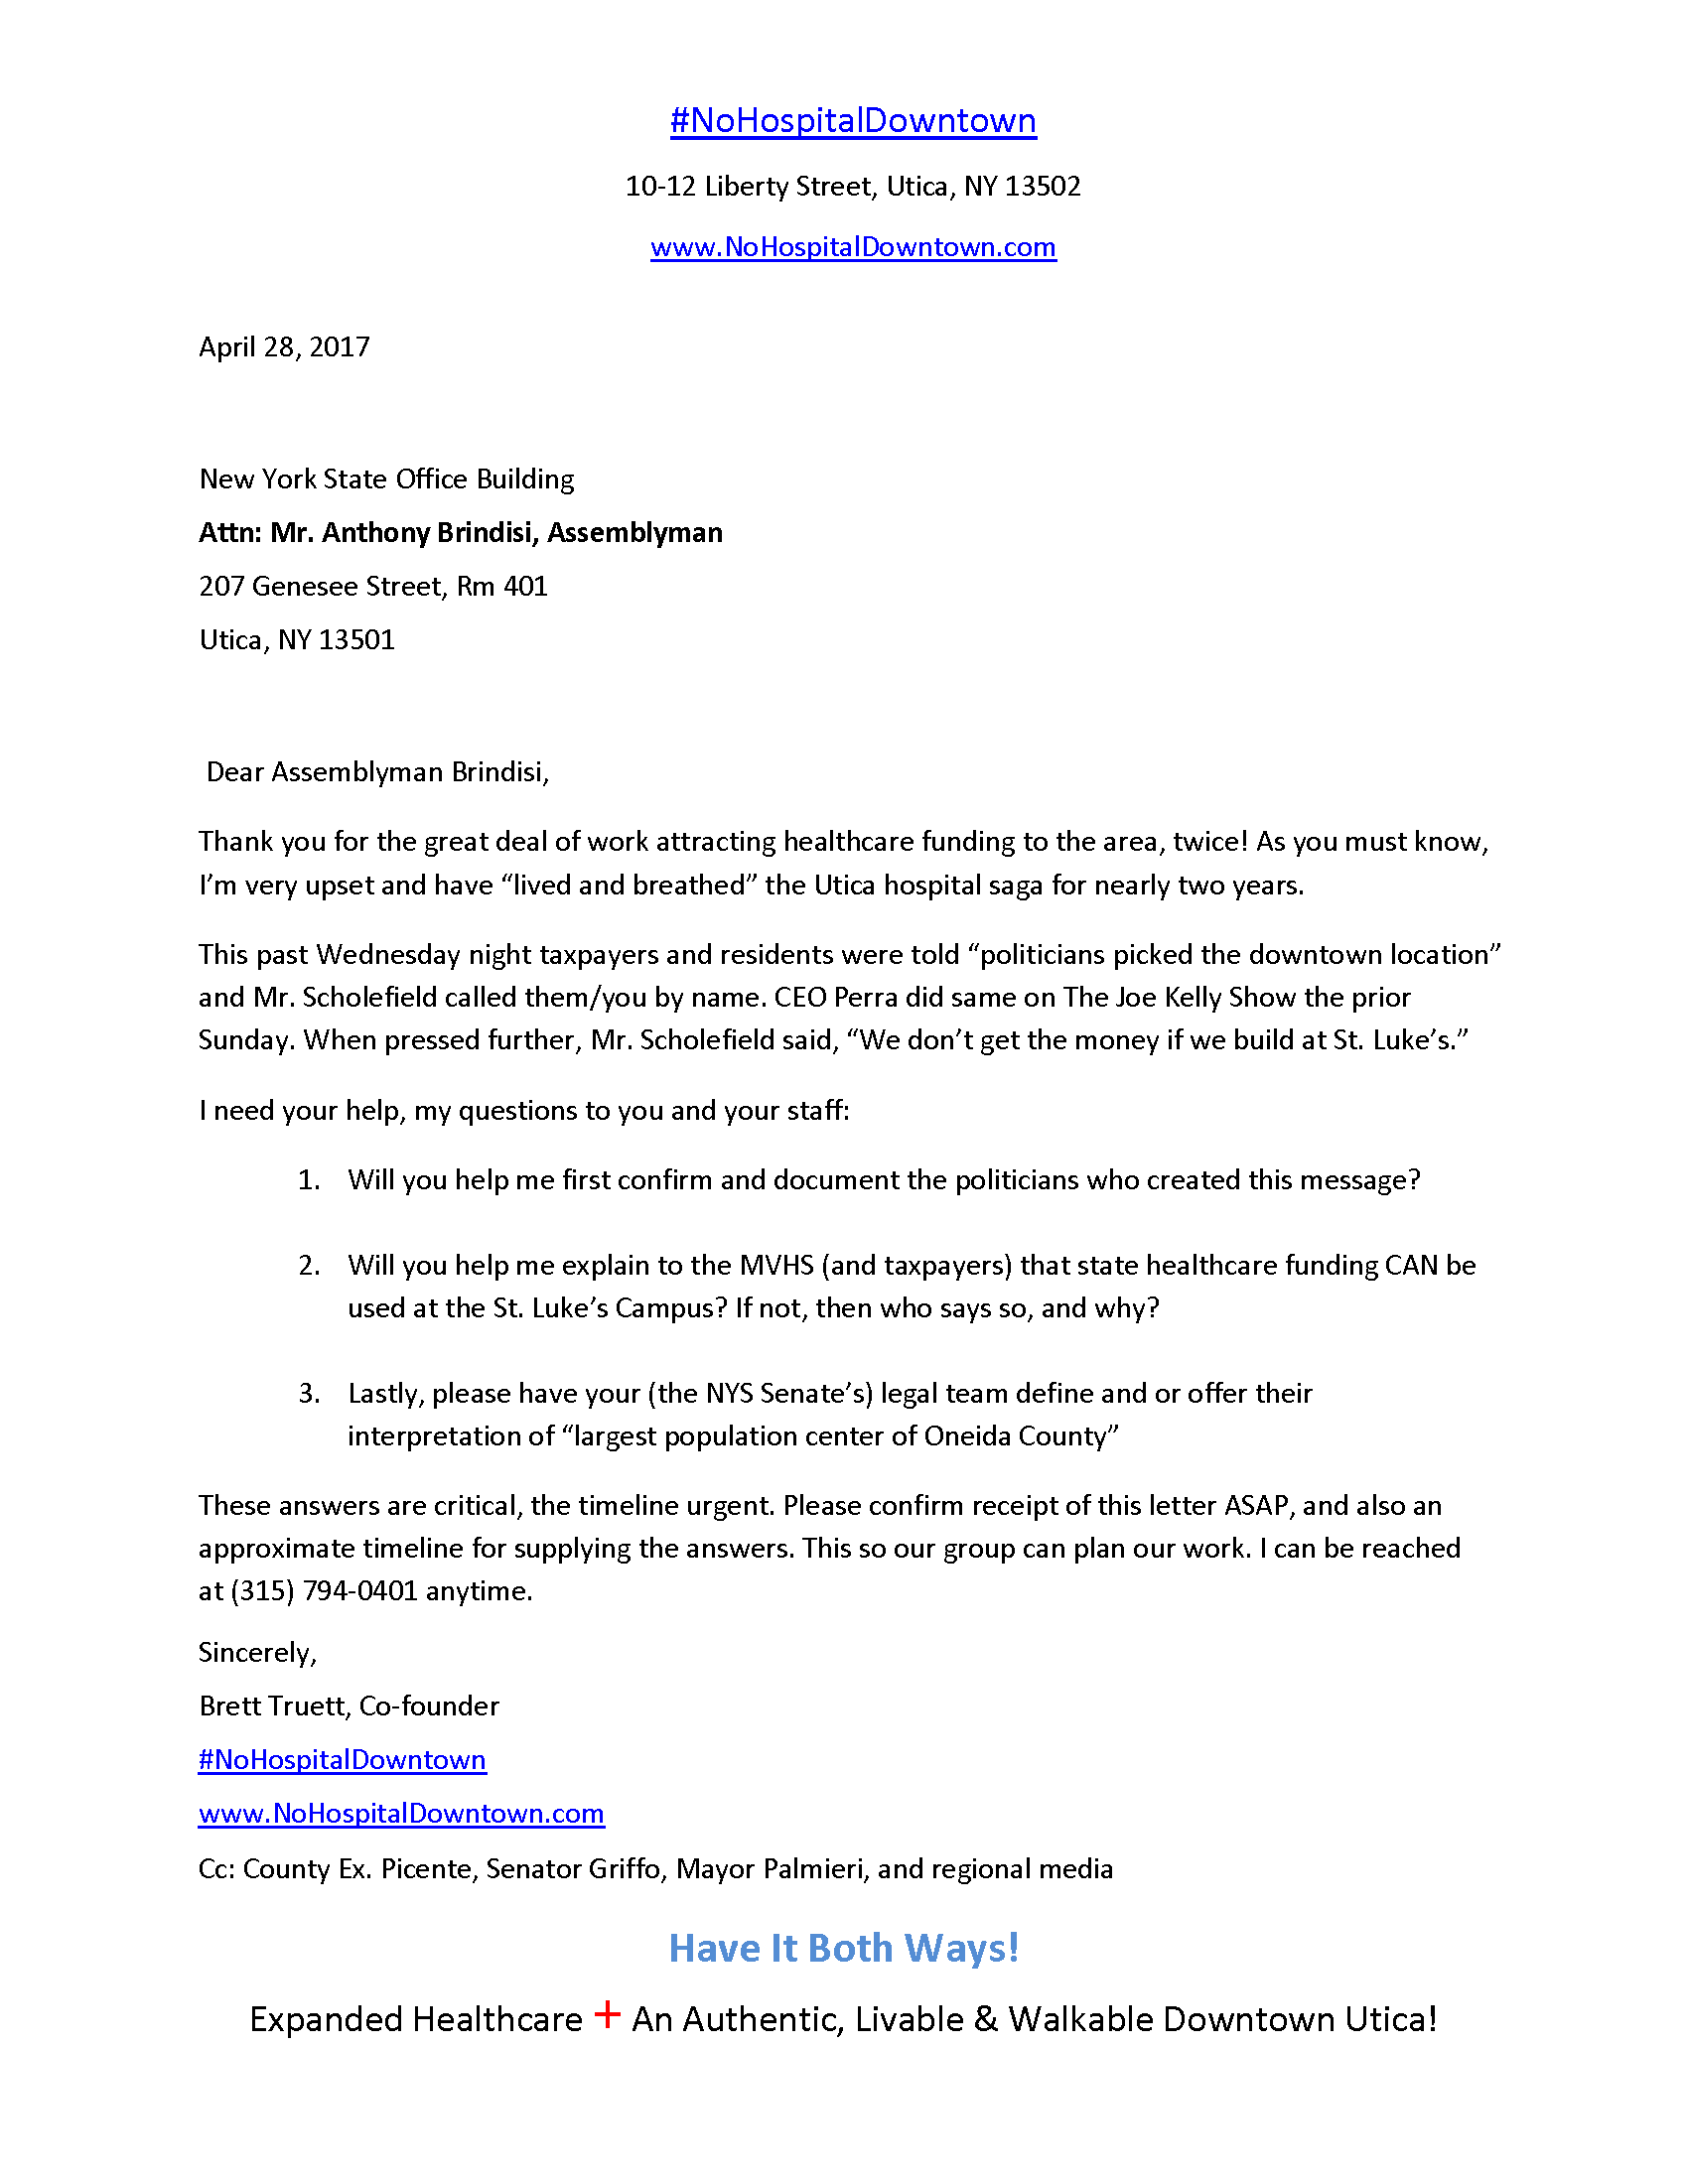 Sample Letter To Senator About Health Care 12